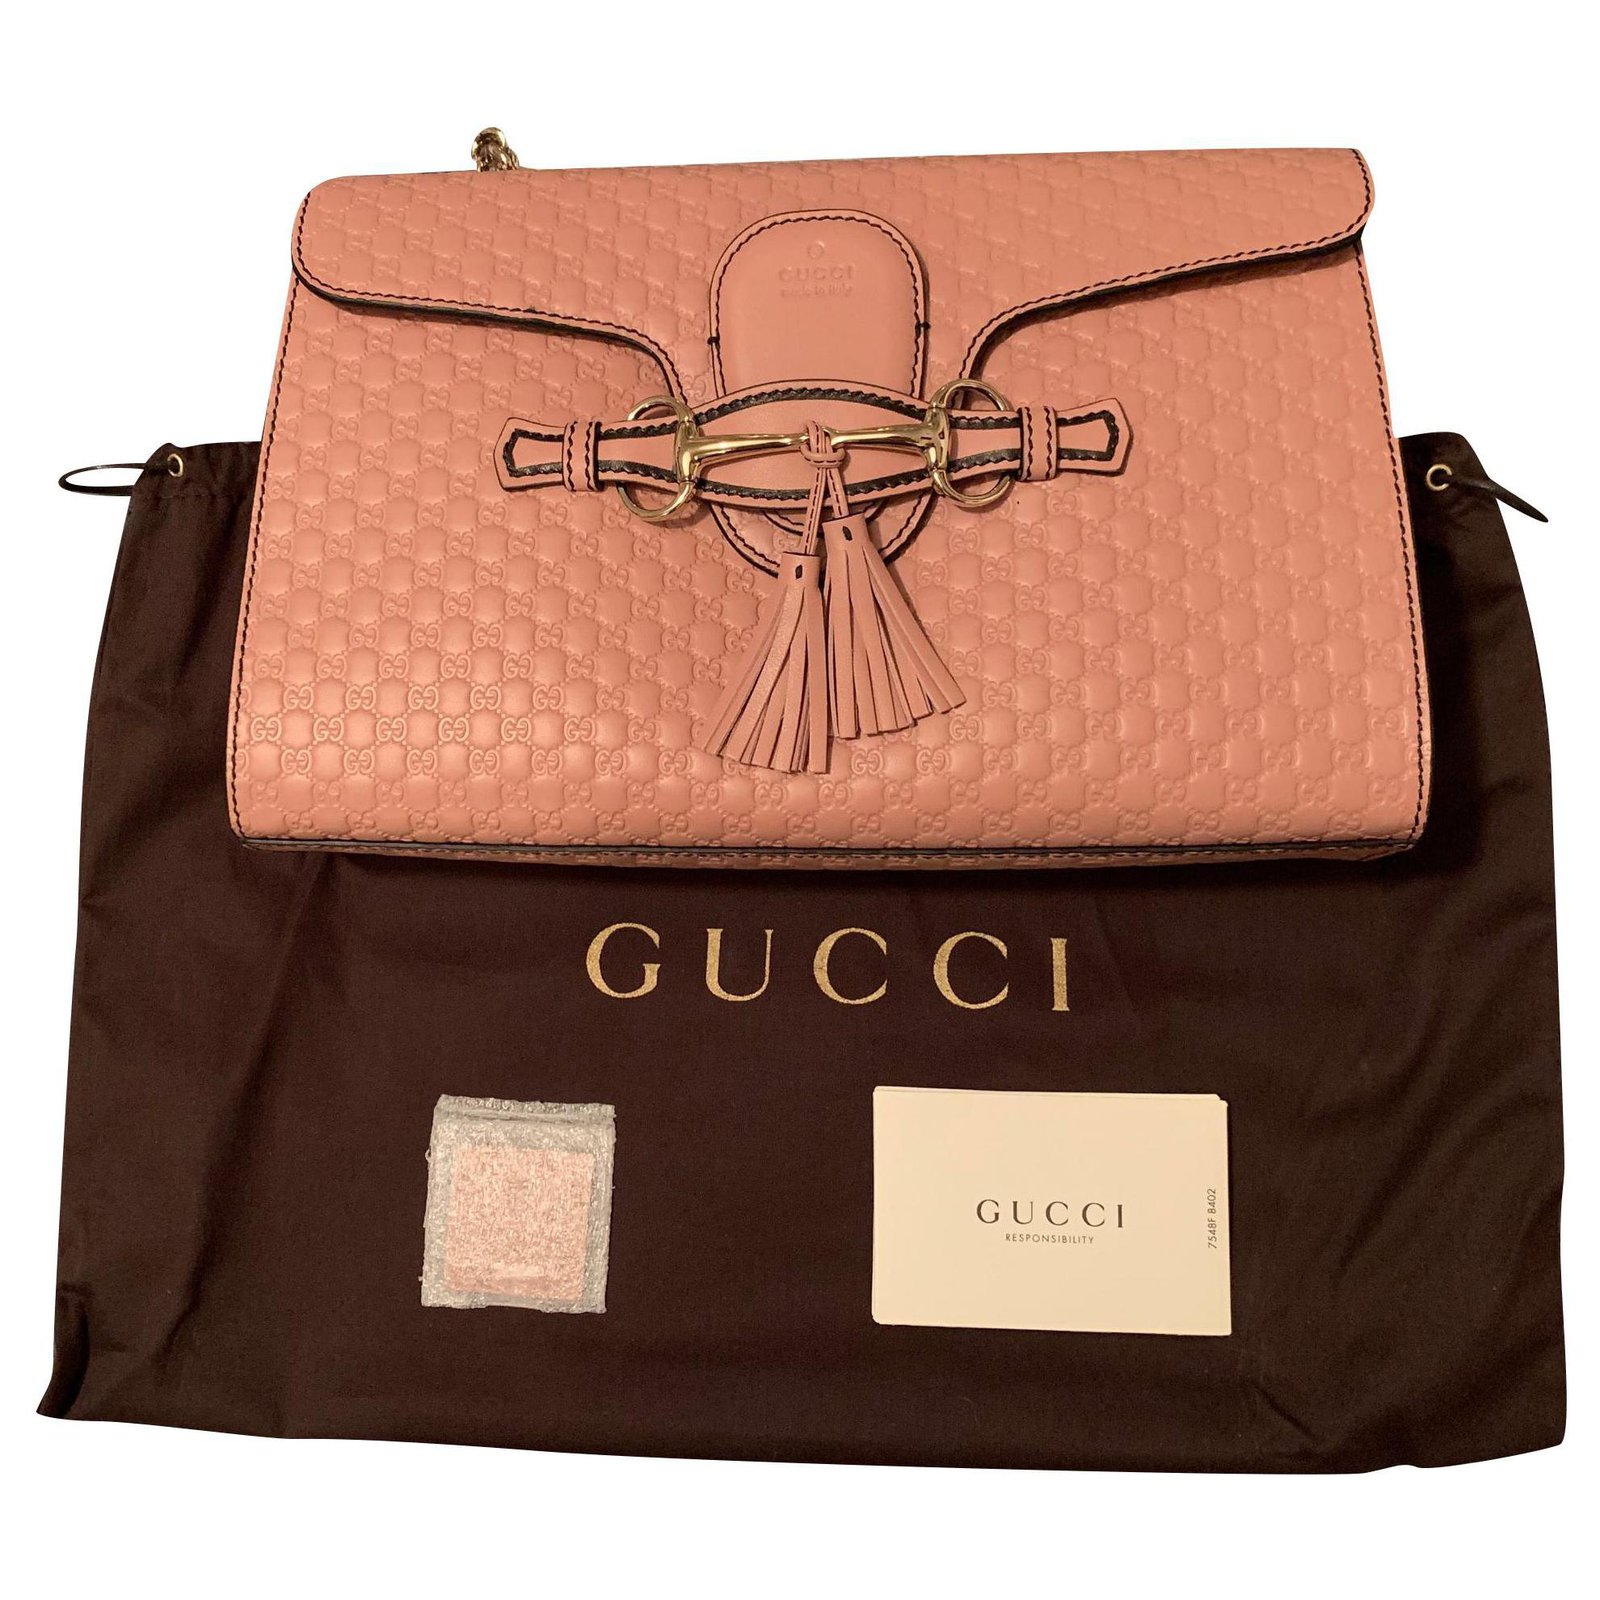 Gucci Emily Handbags Leather Pink ref 